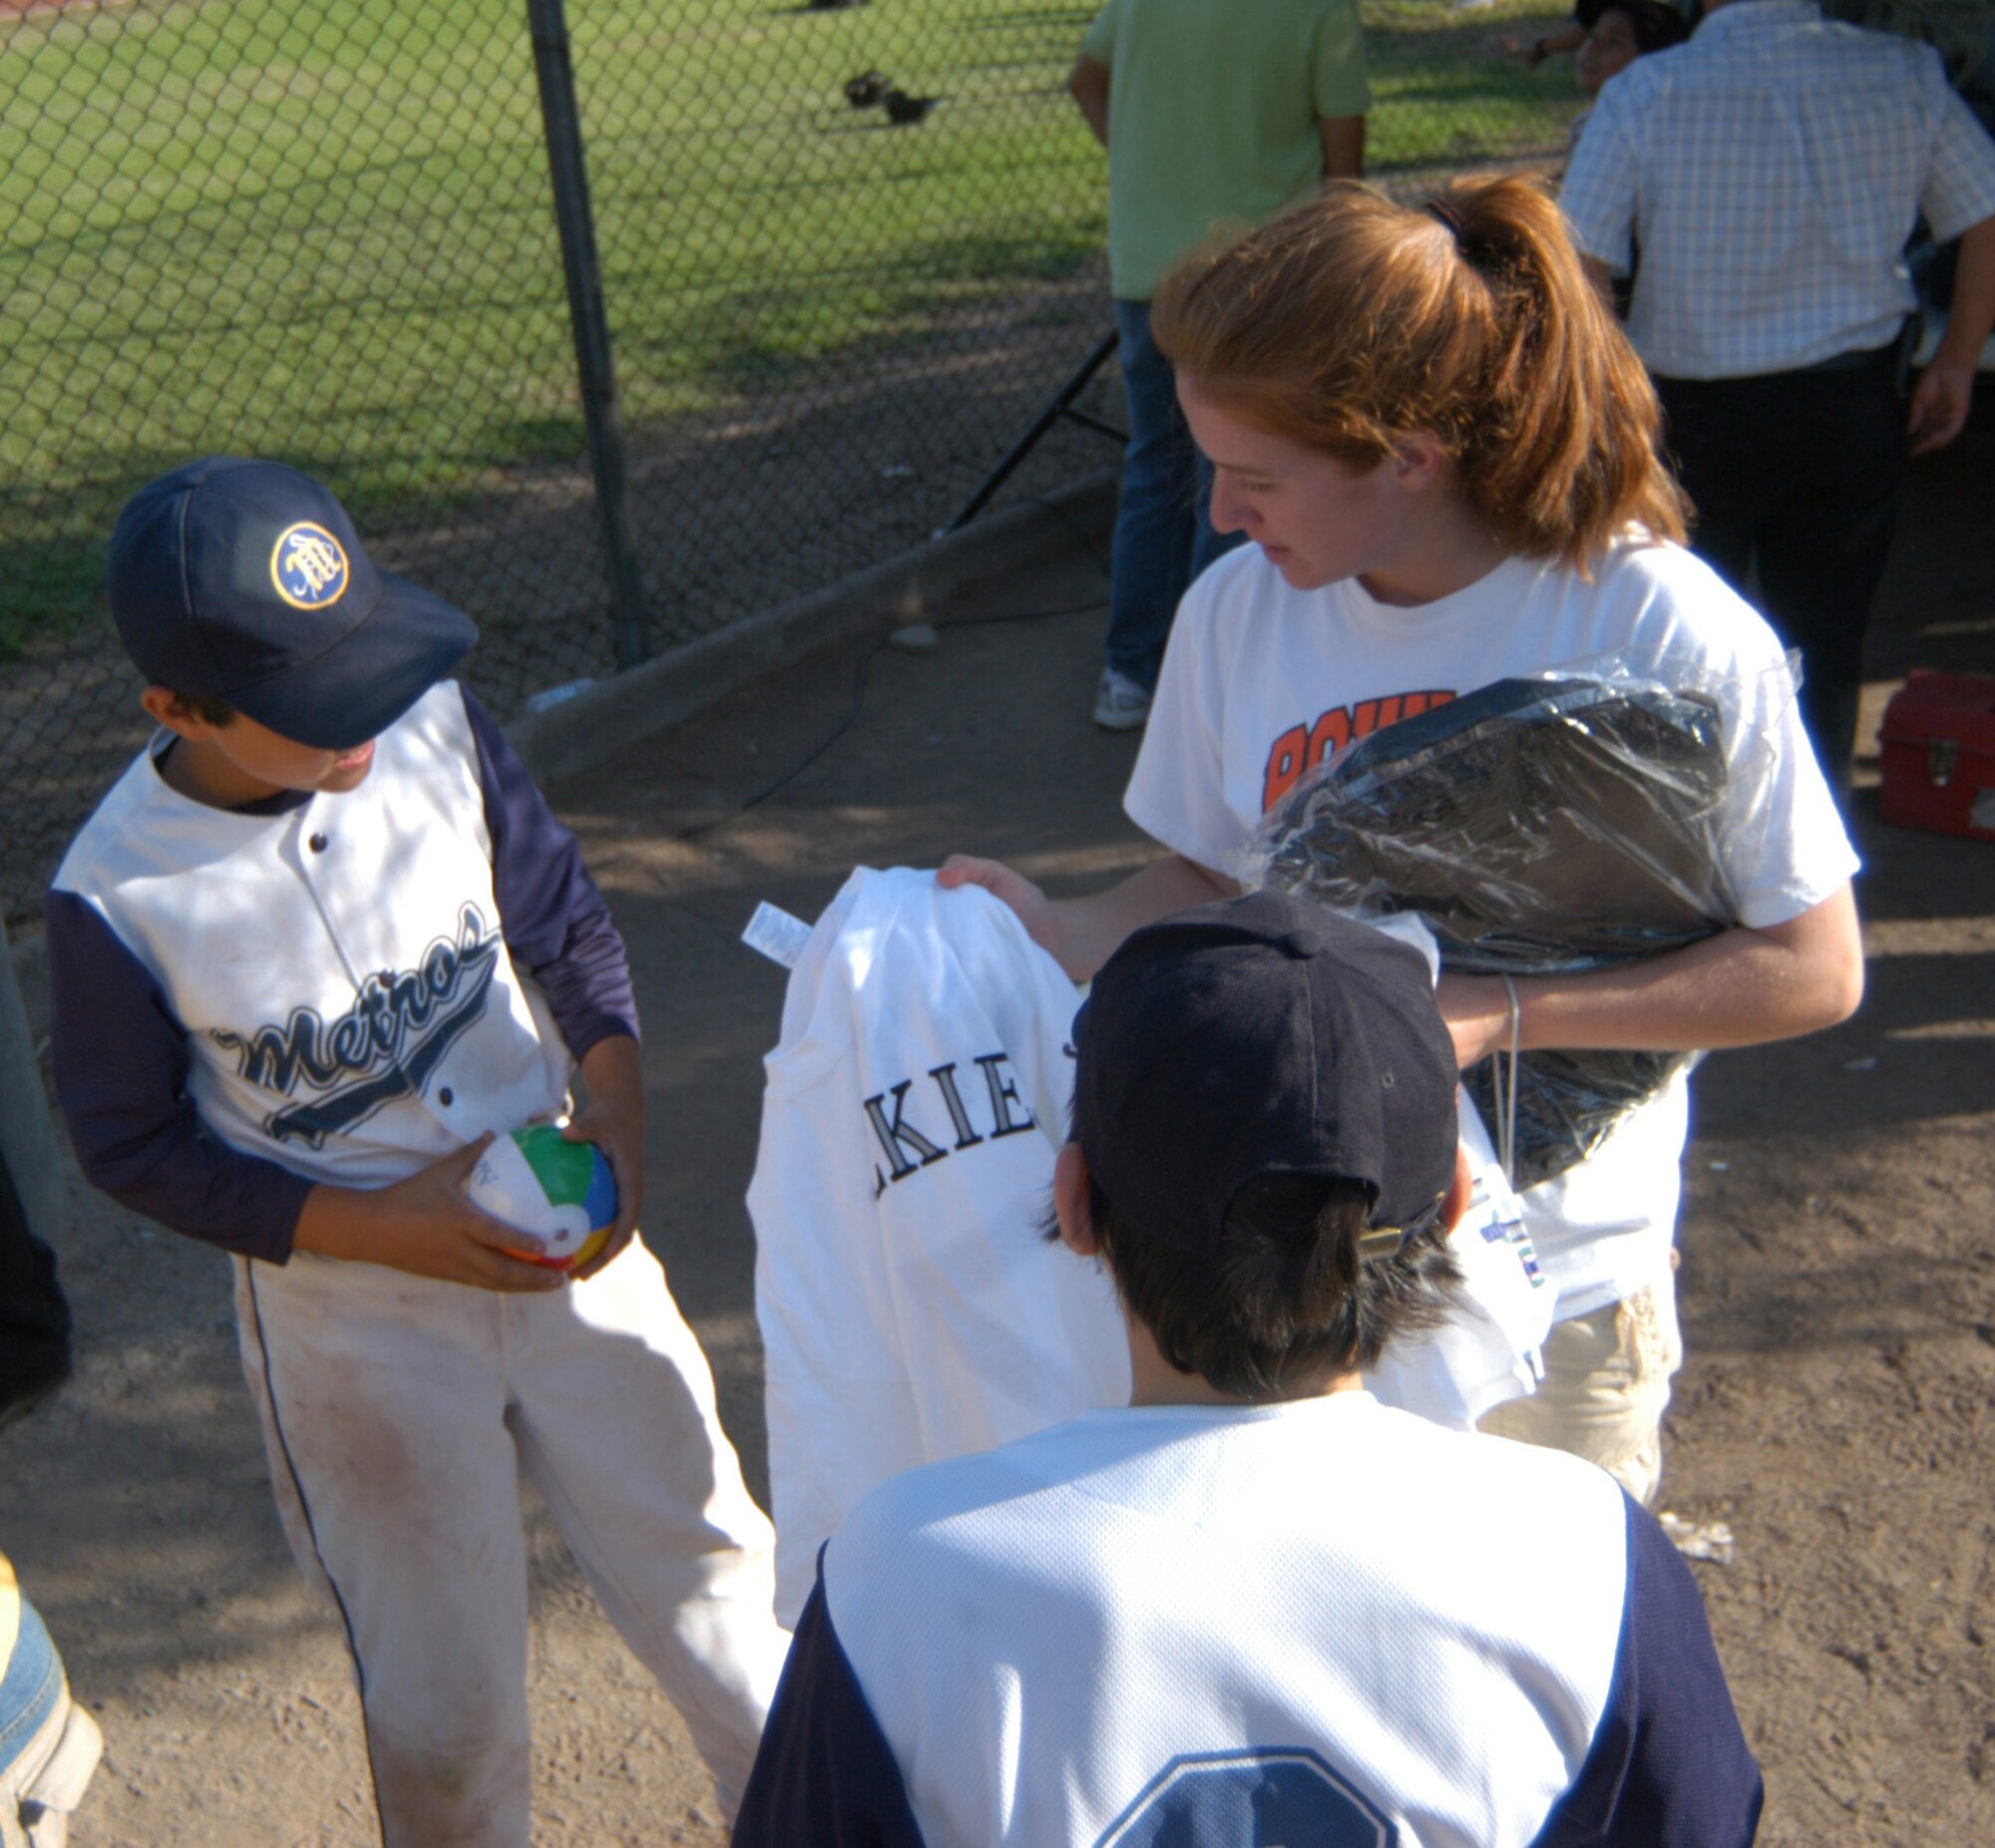 A U.S. Airman gives out tee shirts and backpacks, donated by the Colorado Rockies professional baseball team, to the members of the Santiago Metros semi-pro team. The Airmen were in Chile for FIDAE 2008, one of the largest air and trade shows in the world, as well as Exercise Newen. U.S. Southern Command will continue the cameraderie later this year as they launch a baseball diplomacy tour. (U.S. Air Force photo/Master Sgt. Jason Tudor).                               